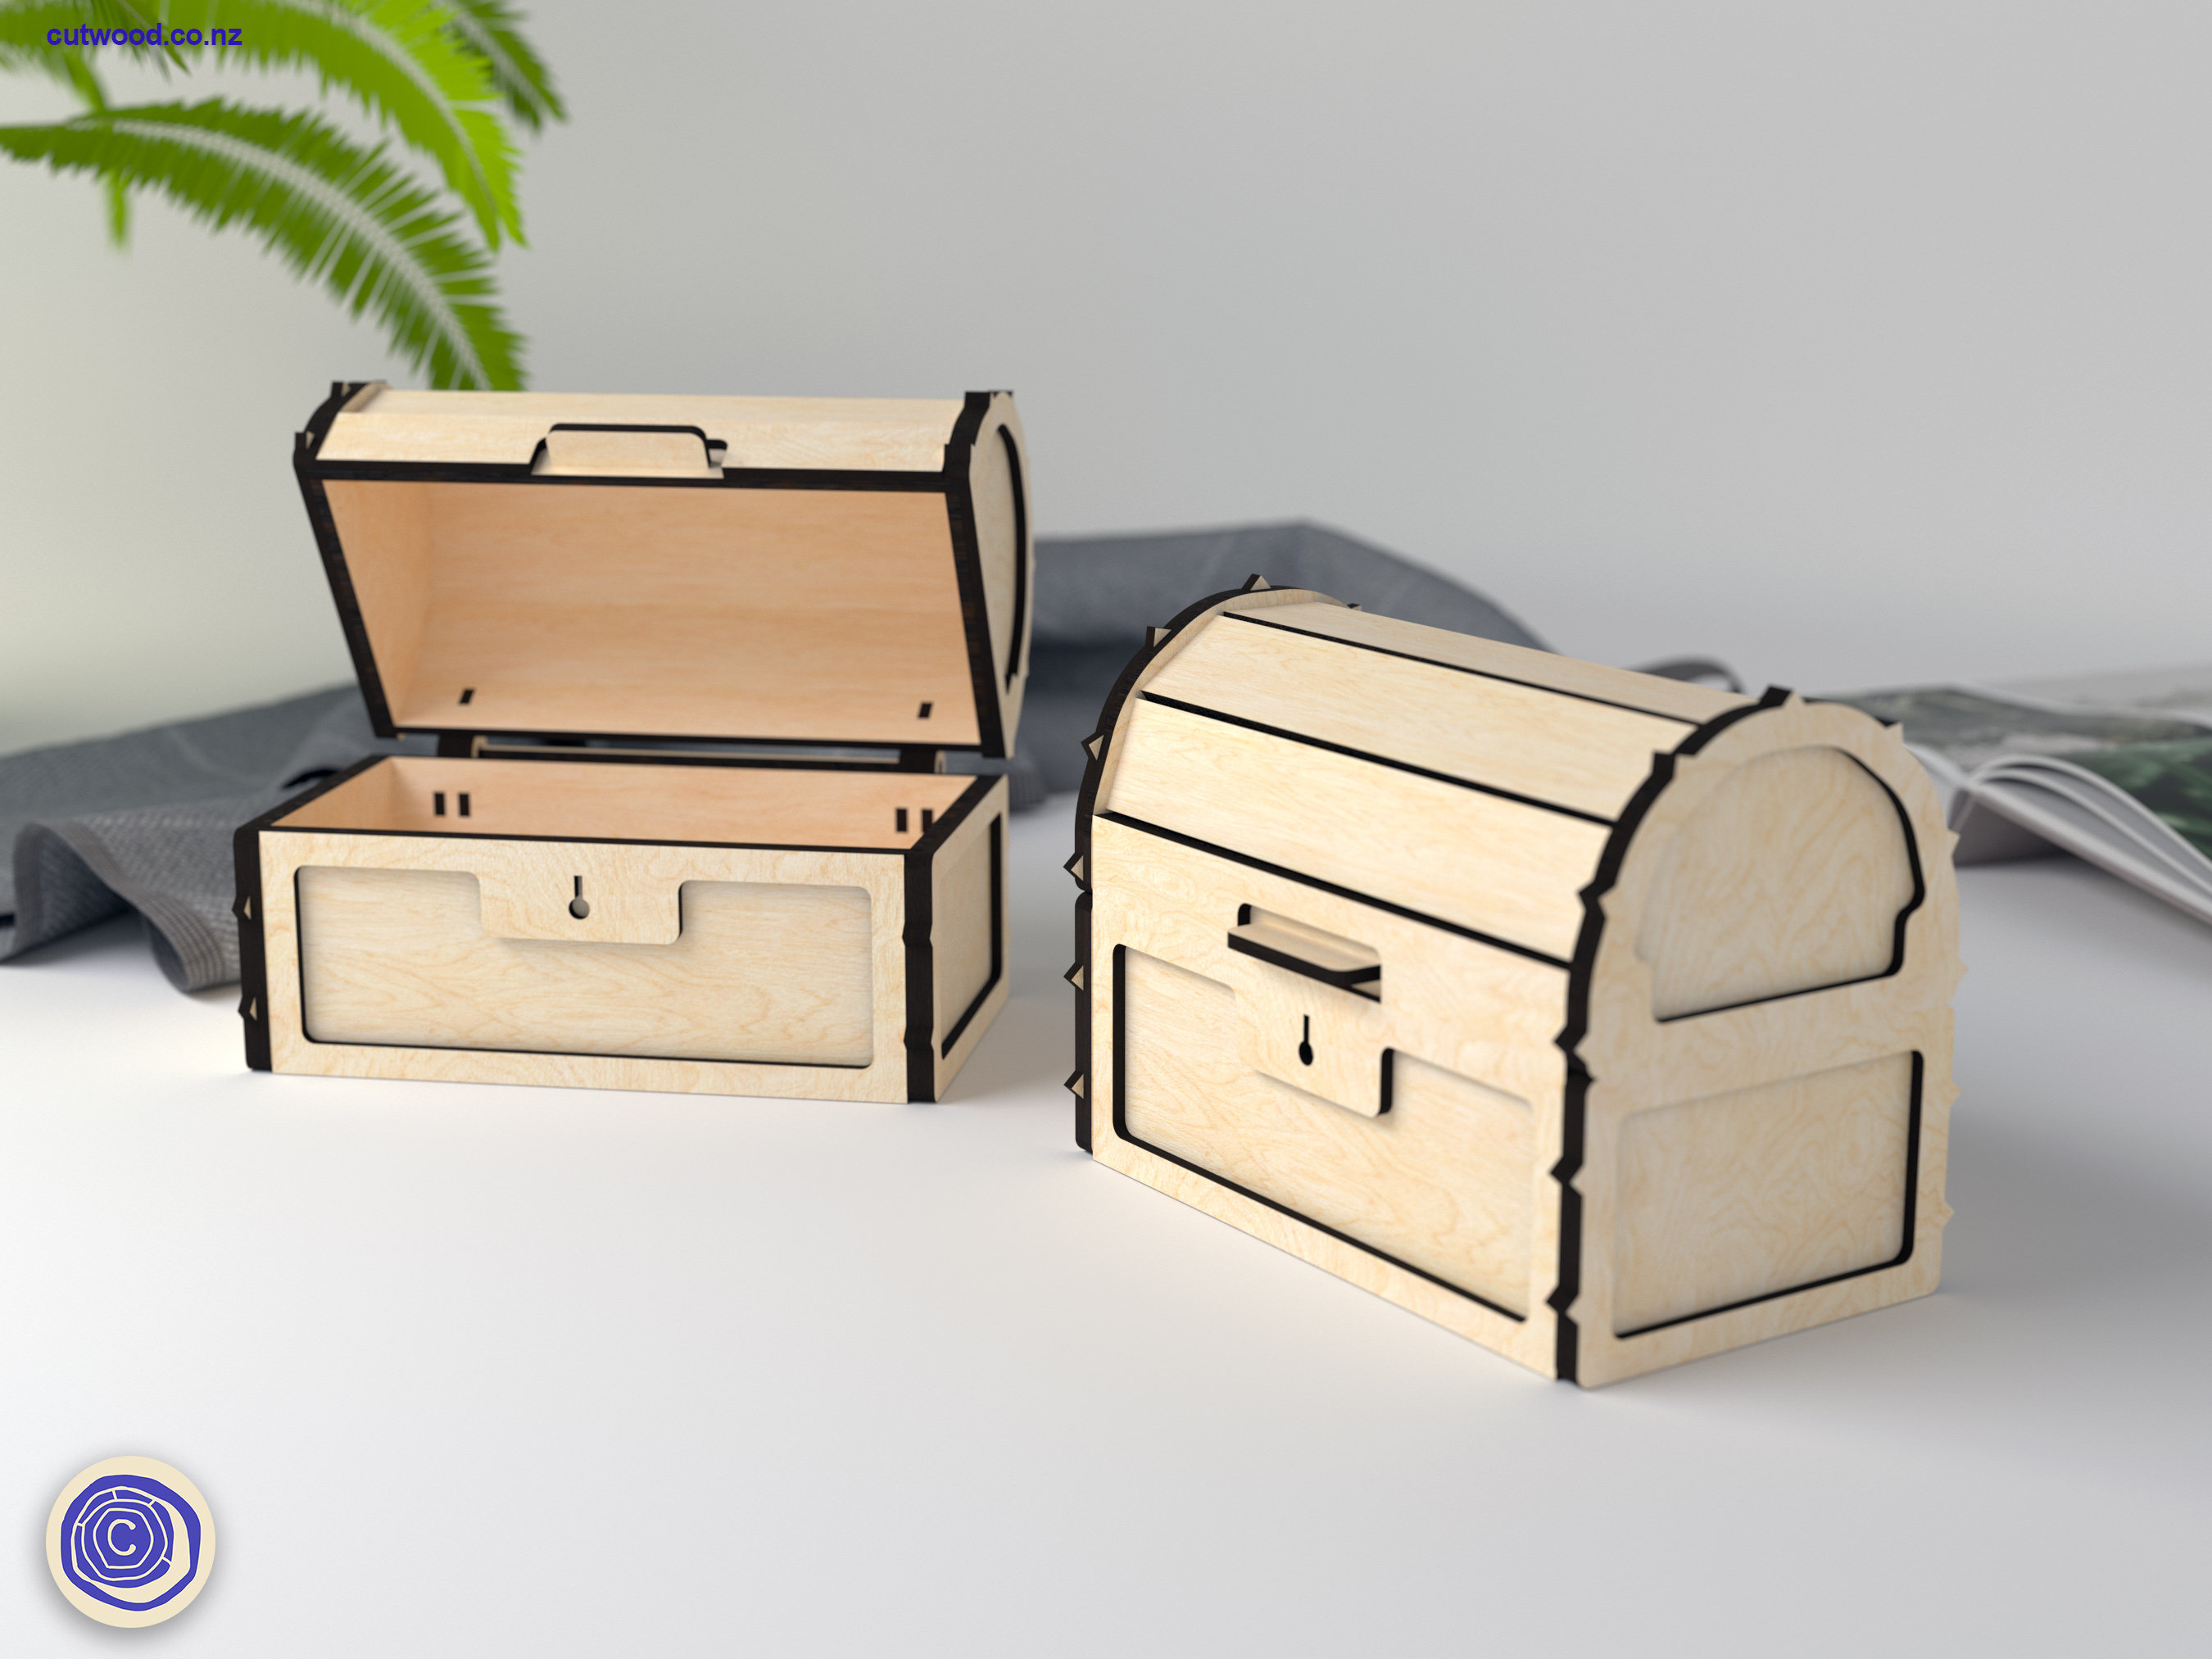 Locked with a key Gift Box Wooden Unpainted Small Money Box 10 x 7.5 x 7.5 cm Wooden trunk/chest 